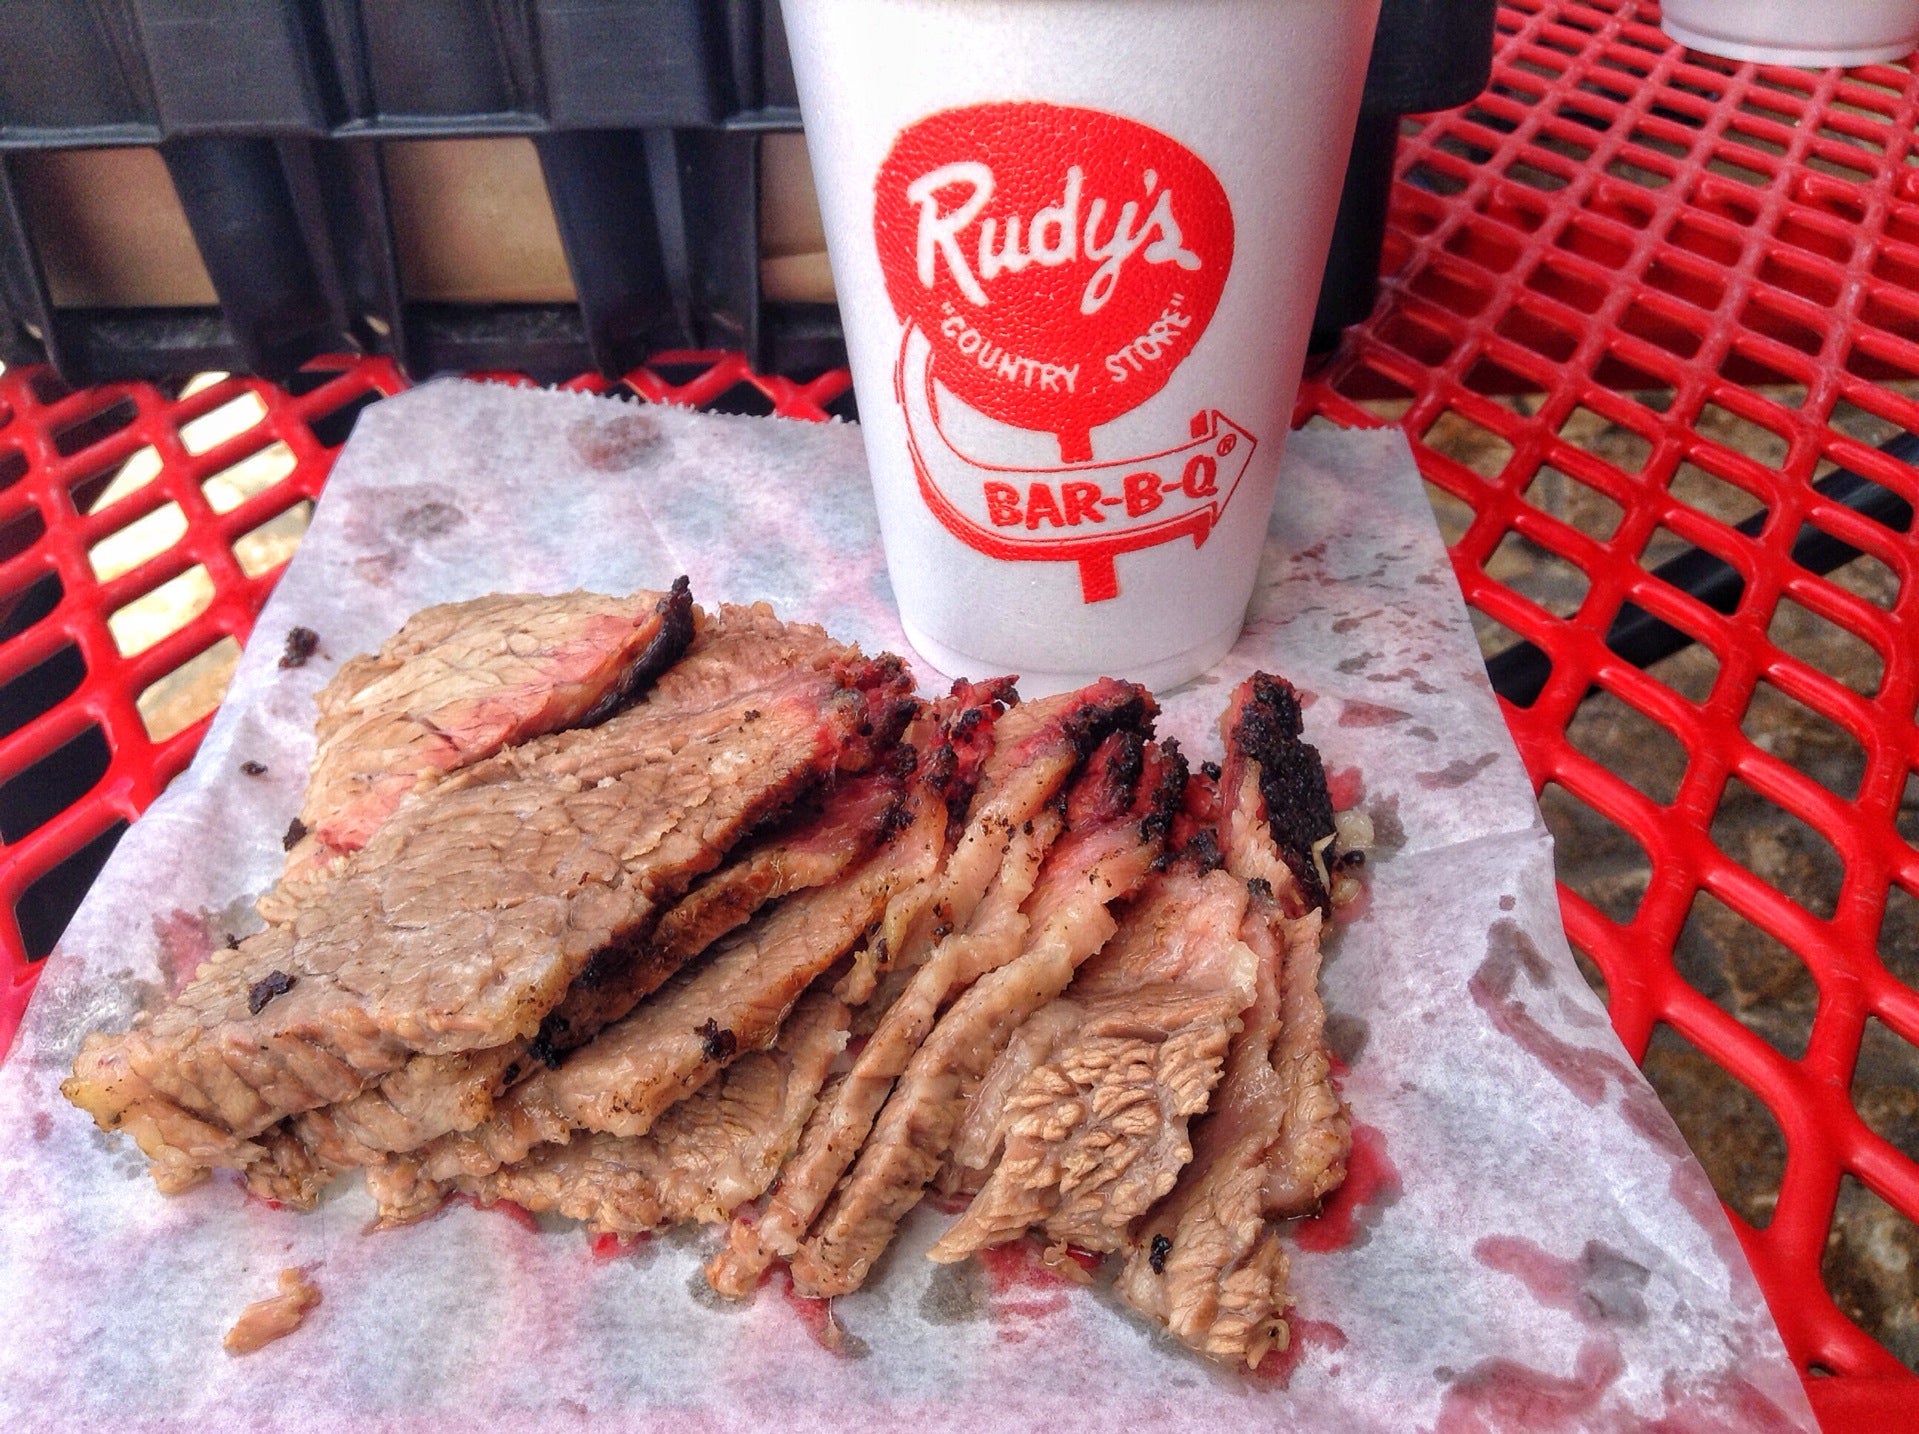 Rudy's Country Store and Bar-B-Q